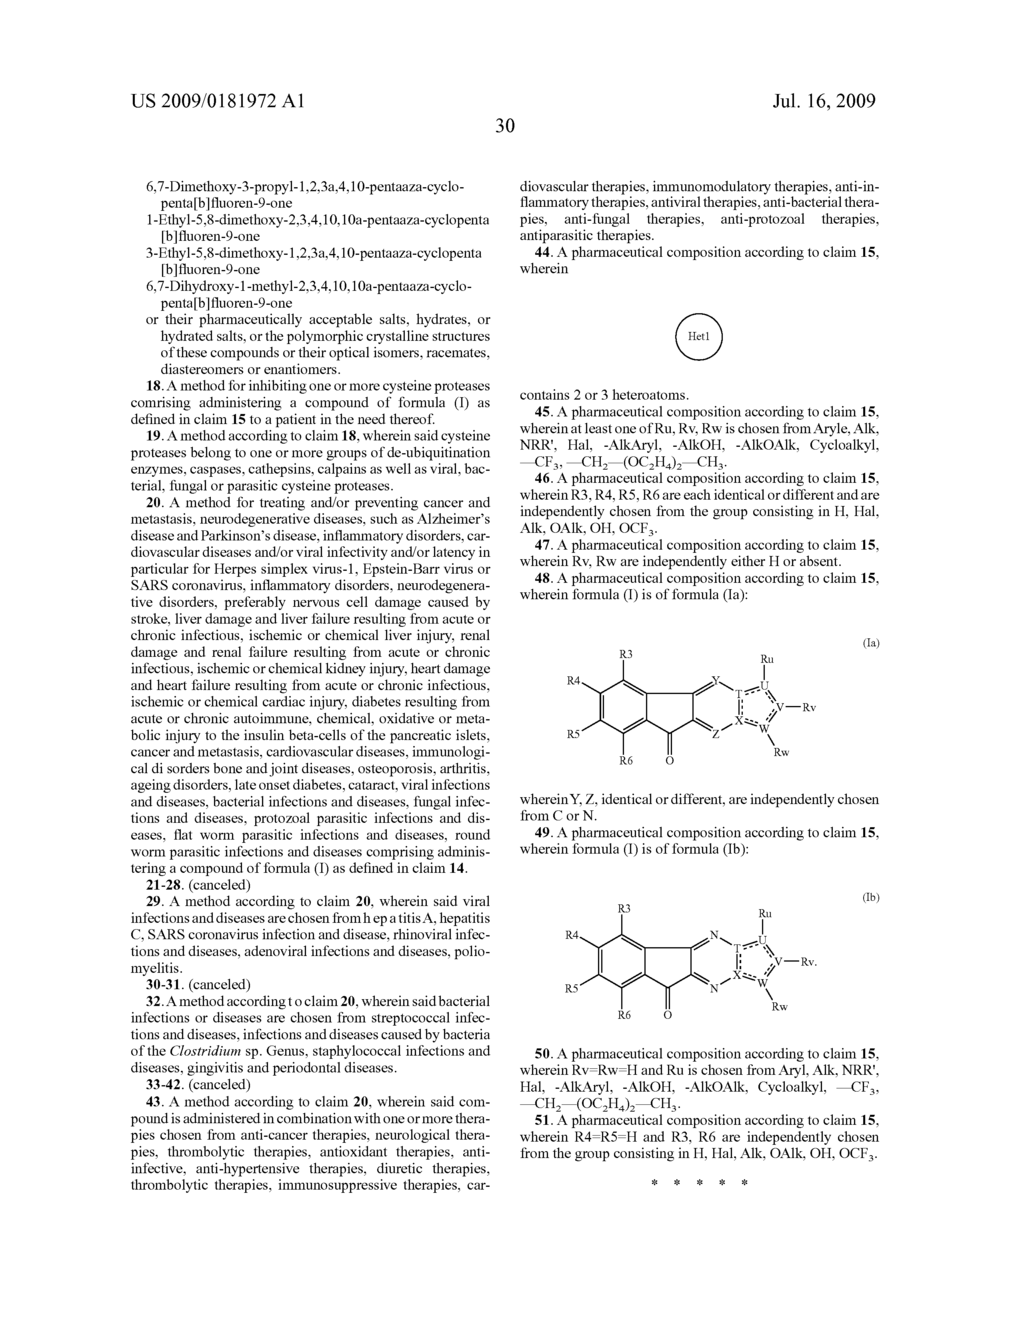 Novel Inhibitors of Cysteine Proteases, the Pharmaceutical Compositions Thereof and their Therapeutic Applications - diagram, schematic, and image 31